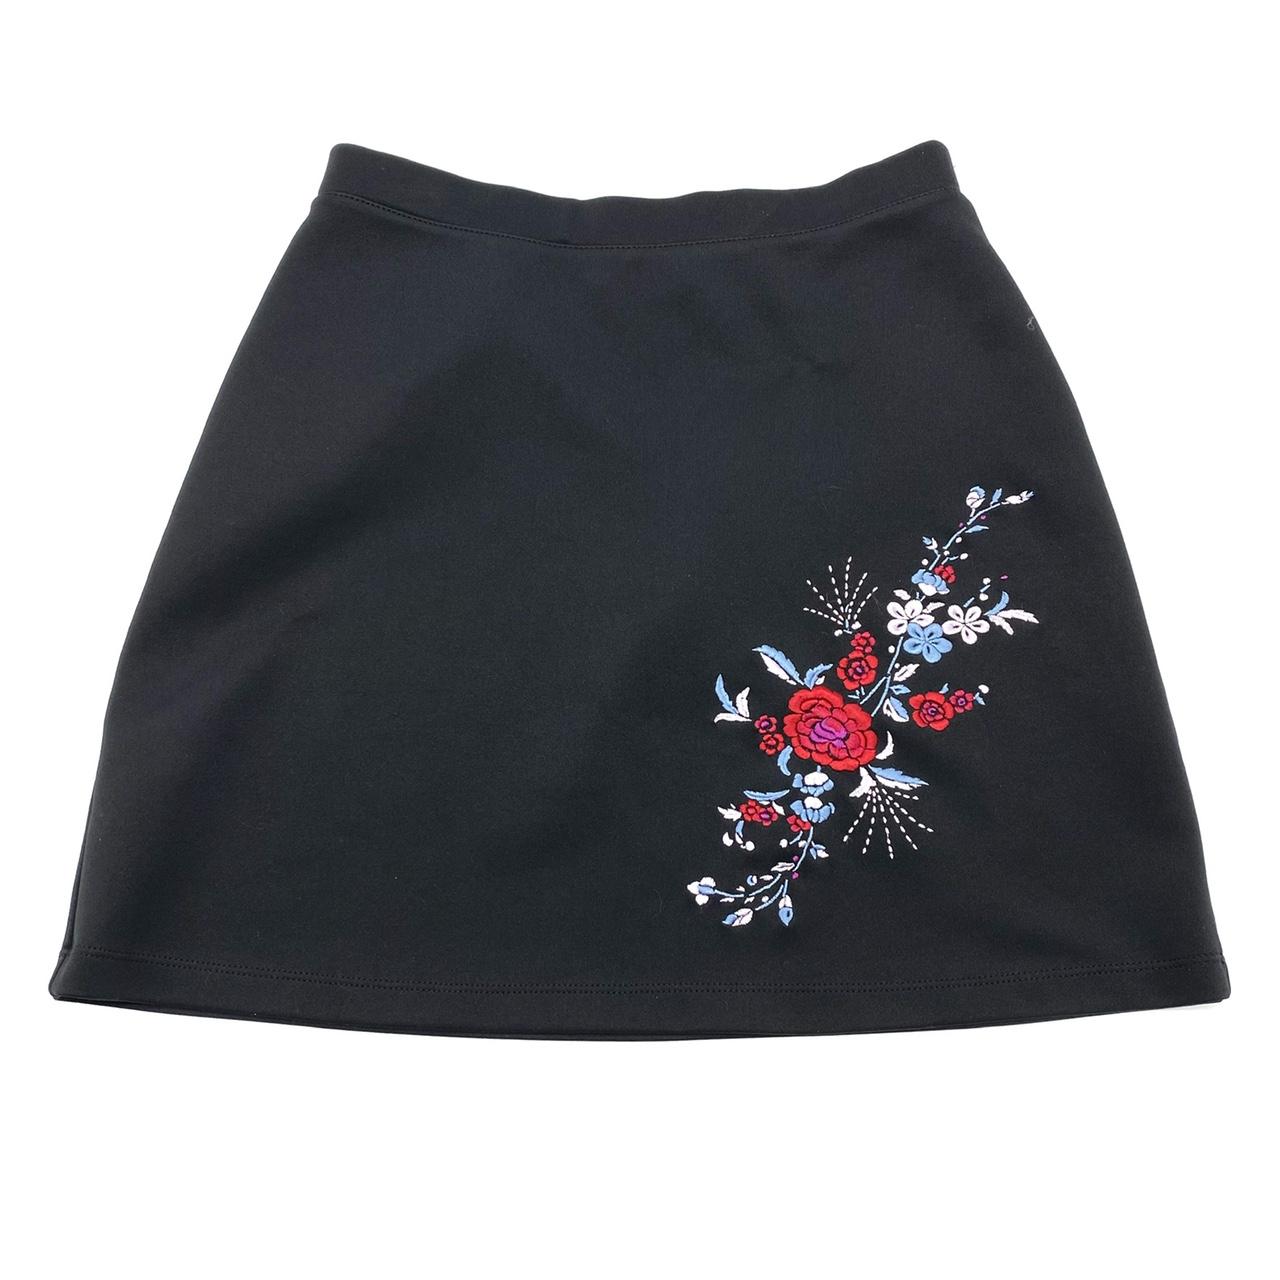 1990s black with floral embroidery skirt Brand:... - Depop